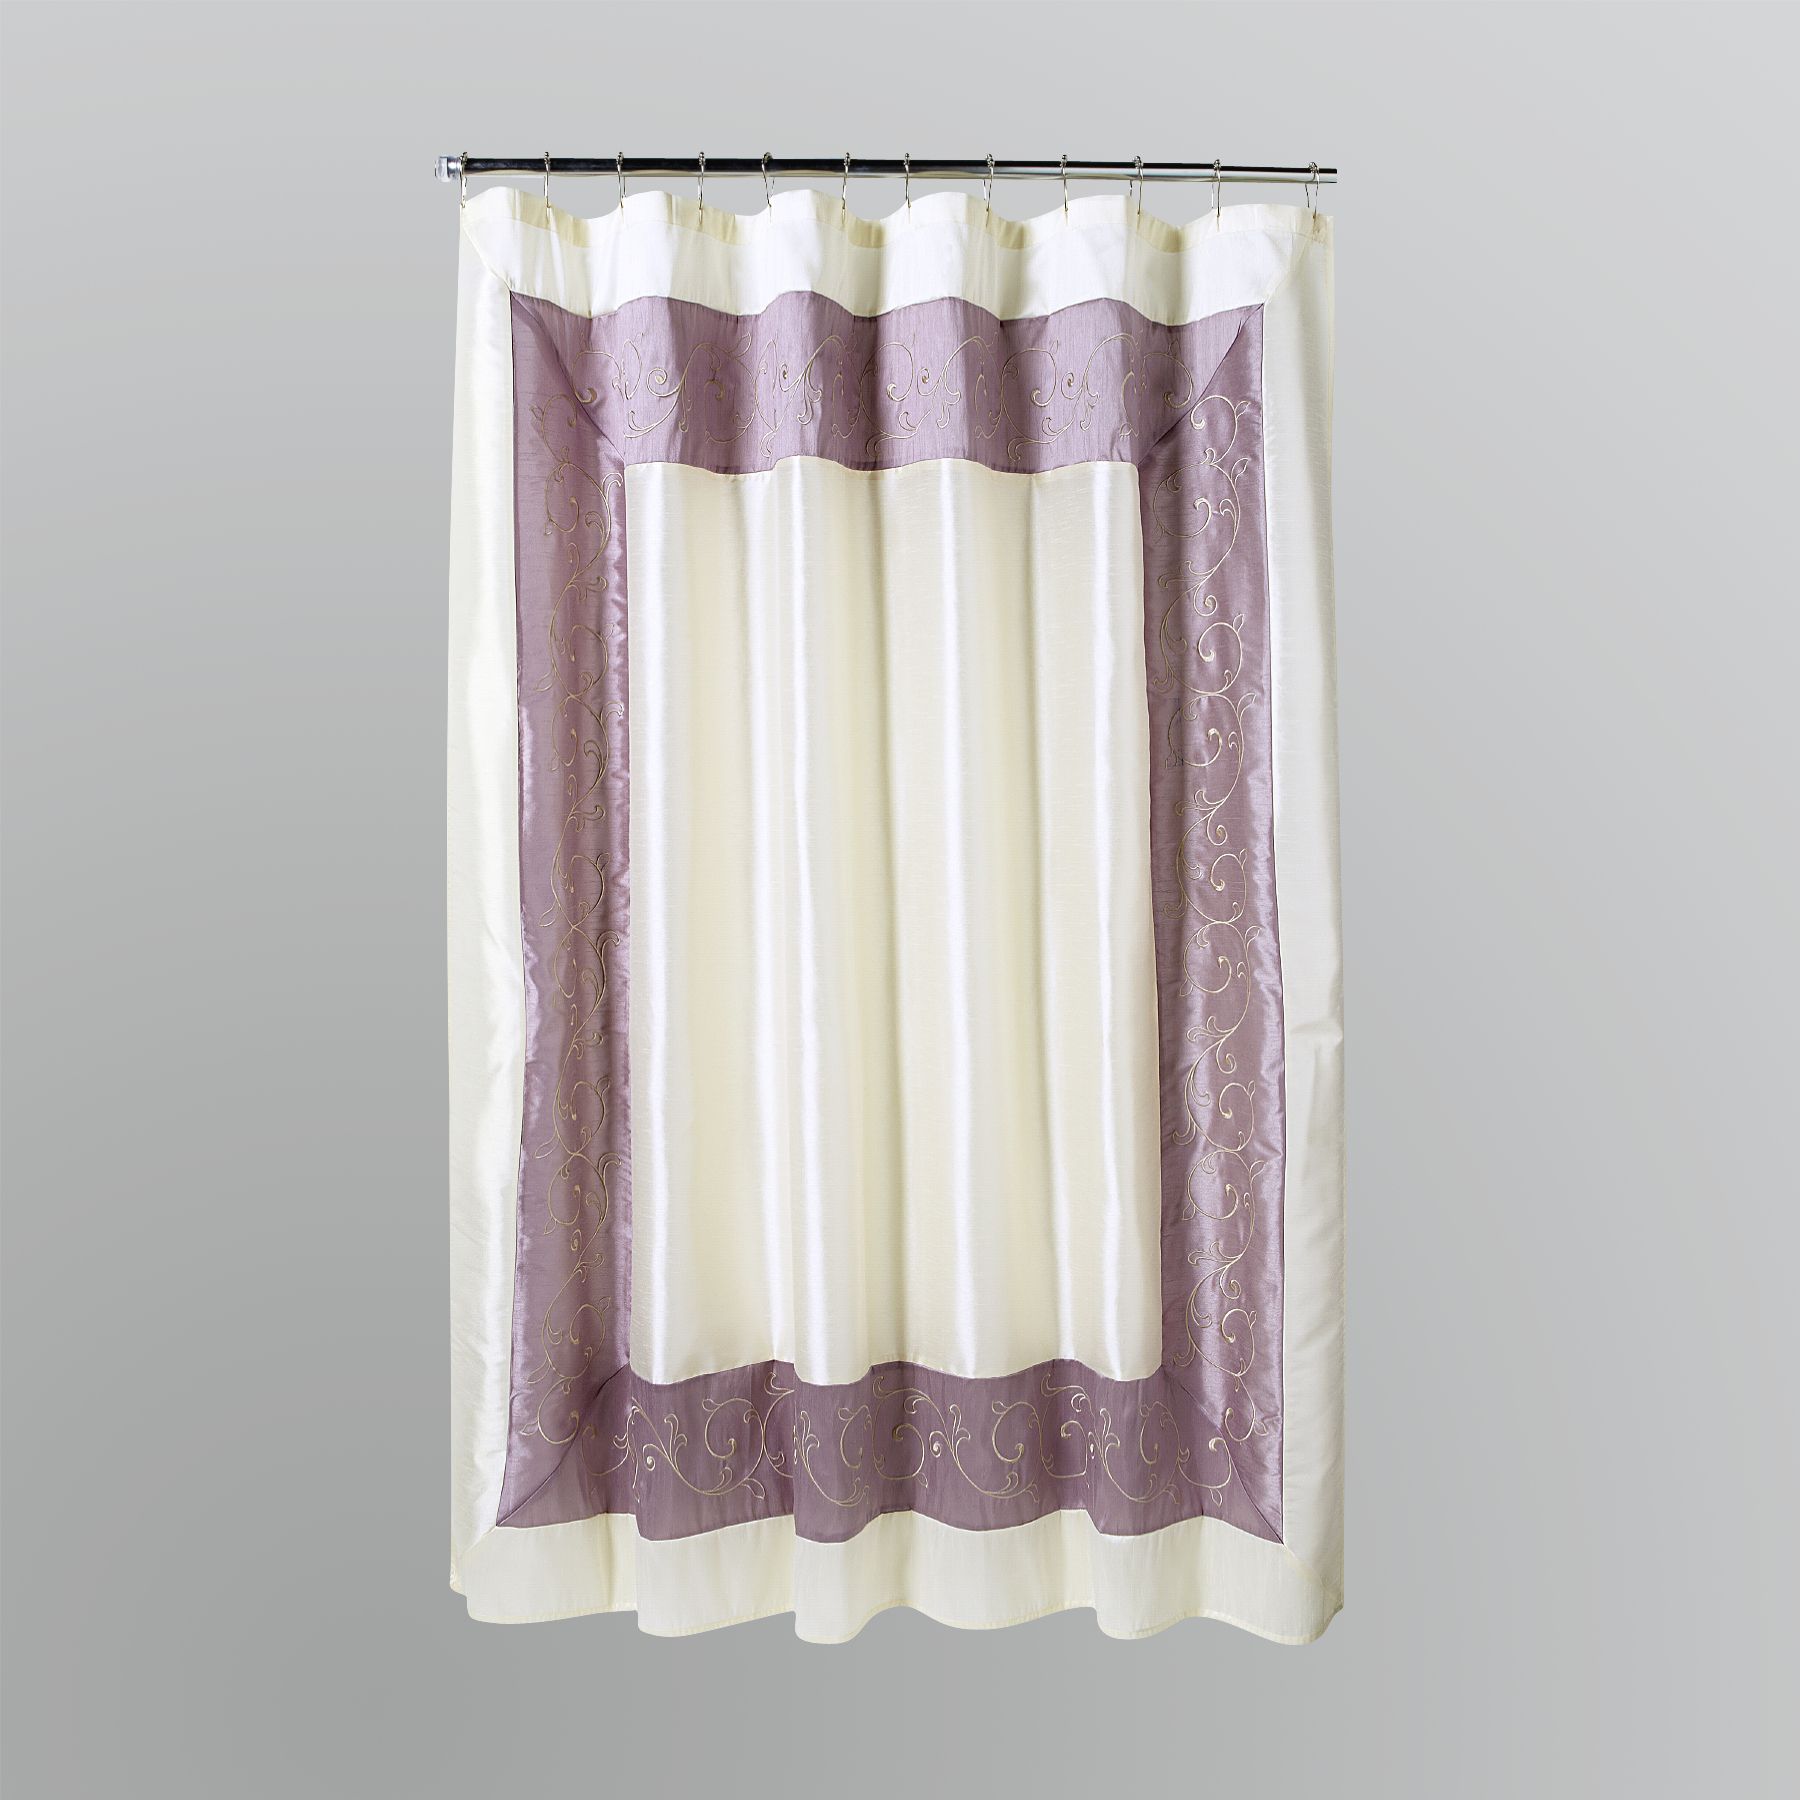 Home Solutions Ornate Scroll Shower Curtain